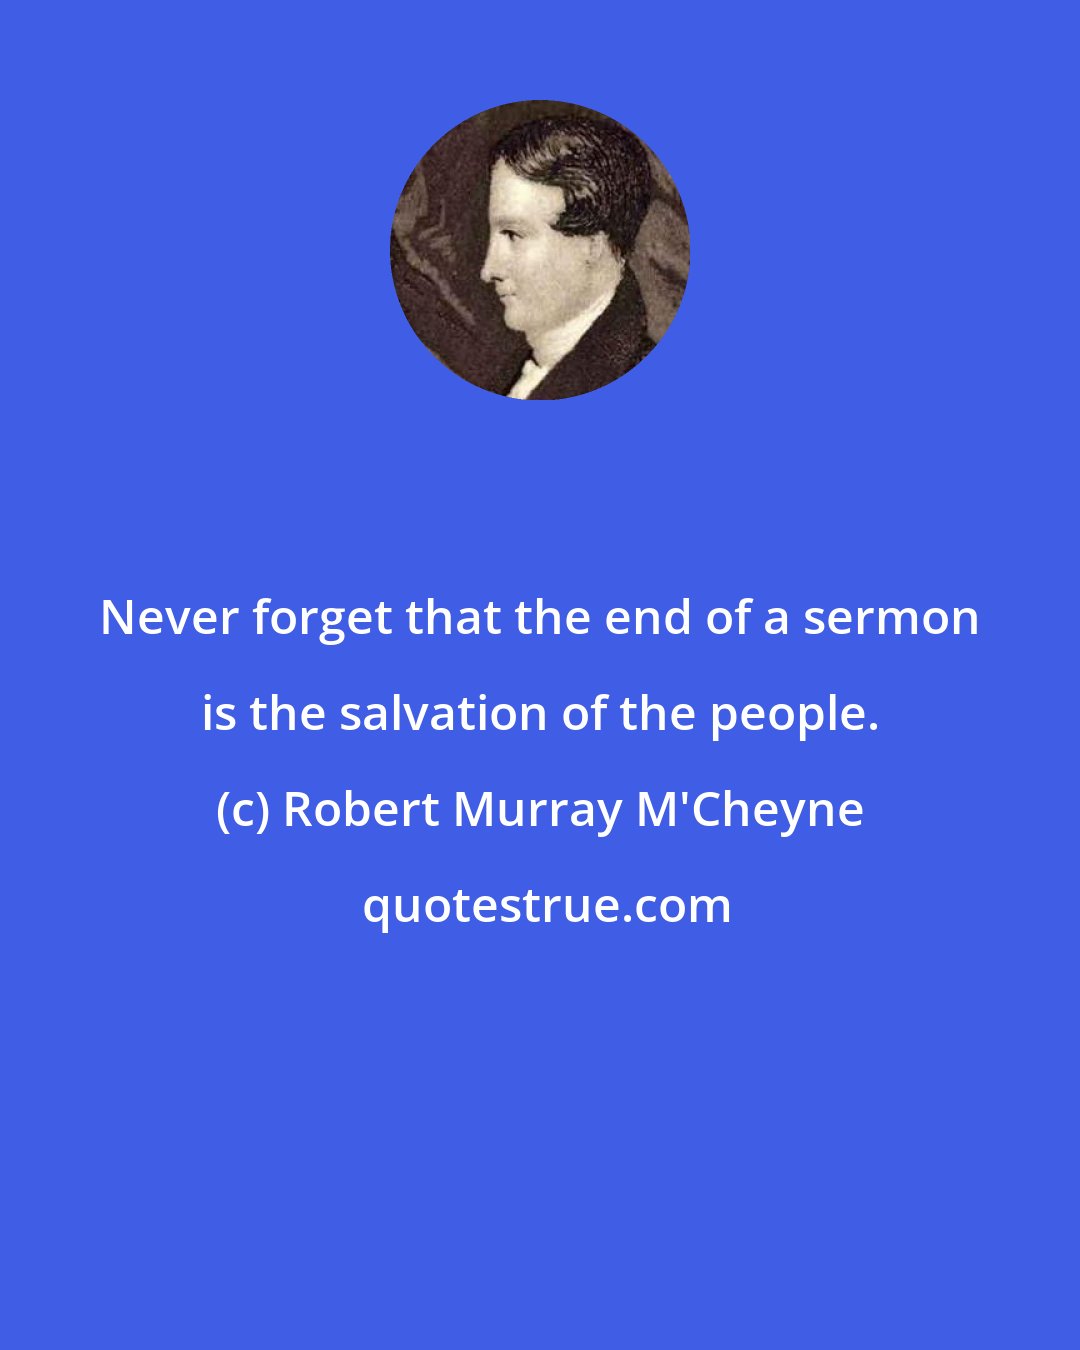 Robert Murray M'Cheyne: Never forget that the end of a sermon is the salvation of the people.